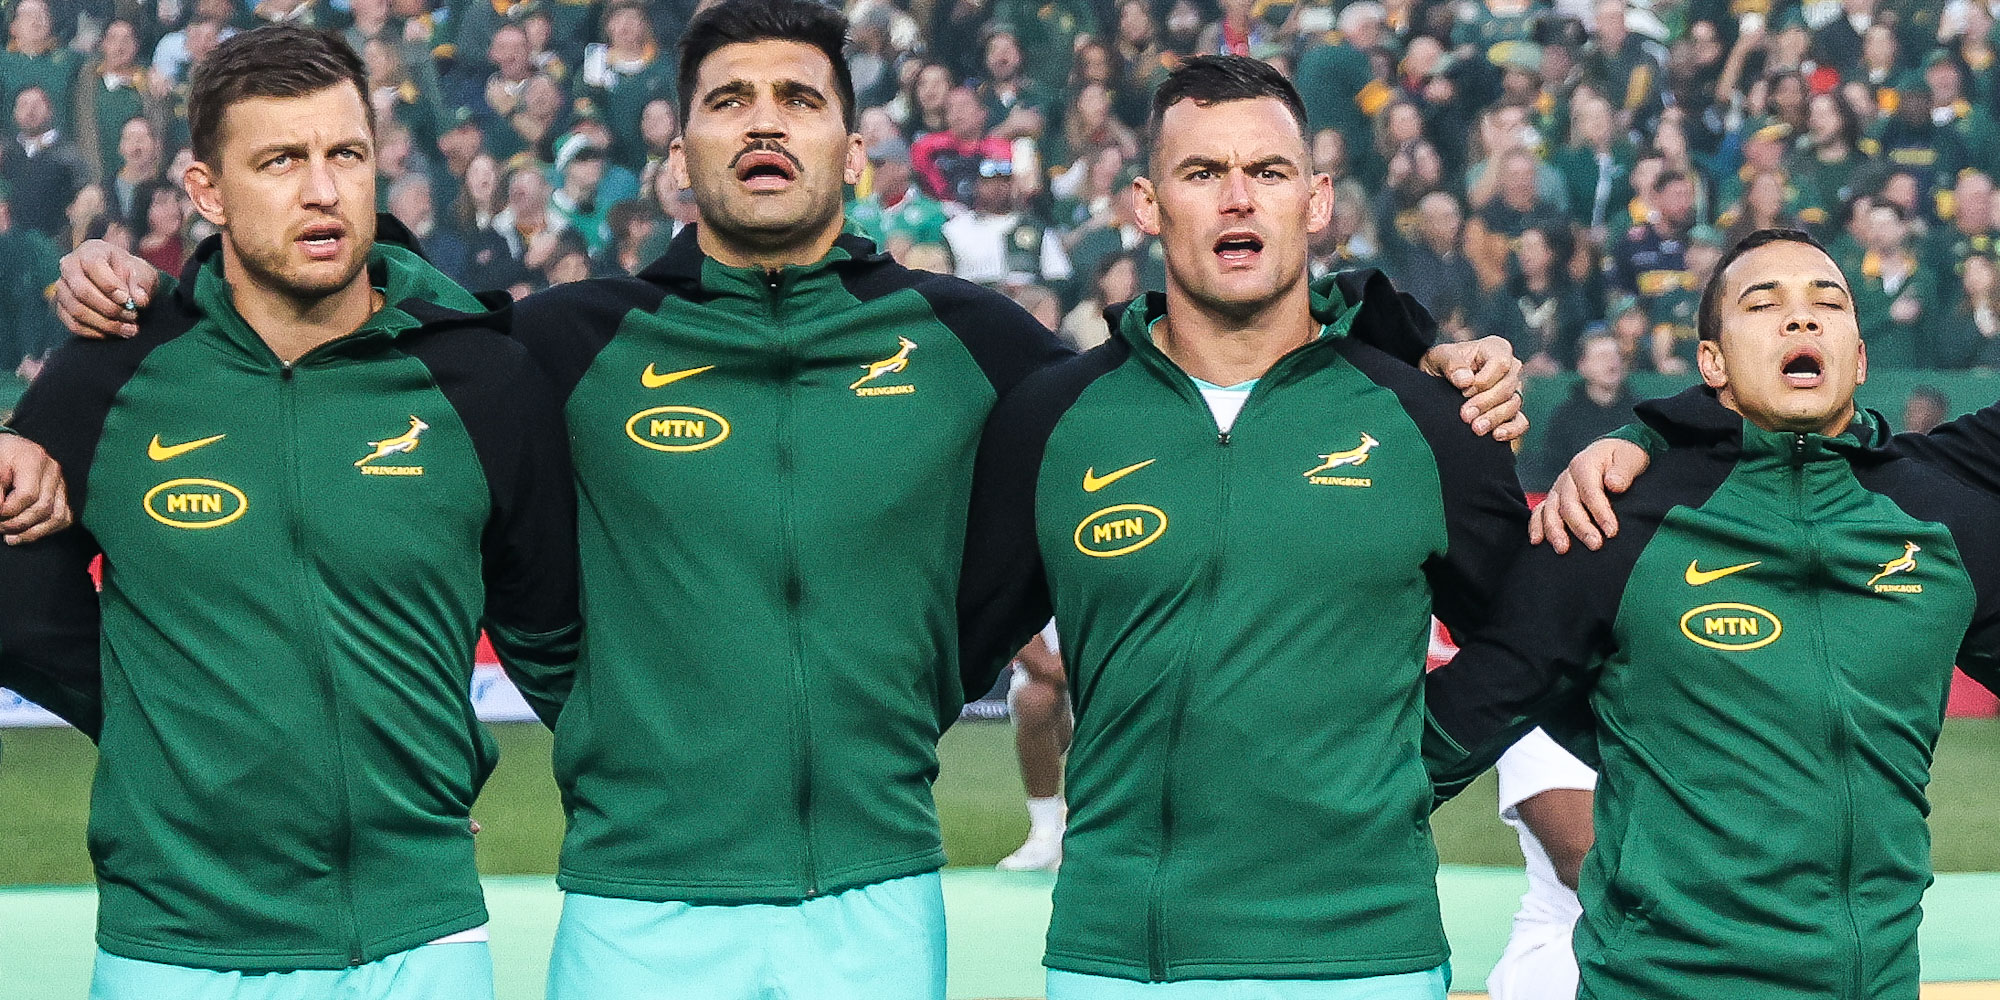 A new Springbok midfield record looms for Damian de Allende and Jesse Kriel.